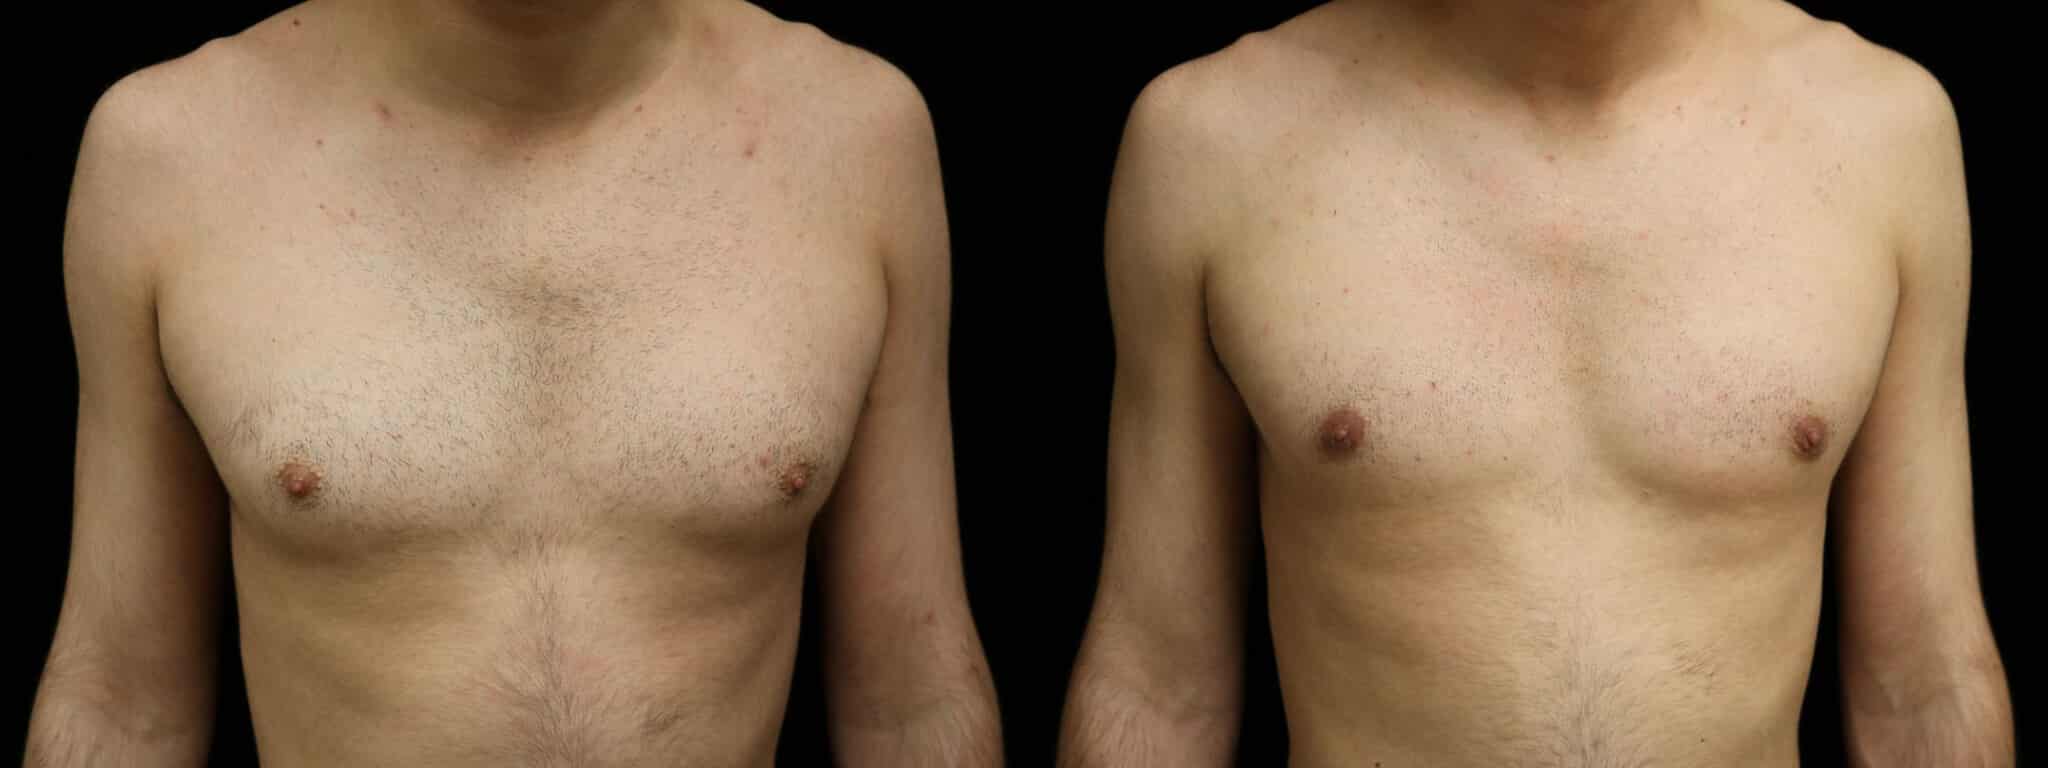 Gynecomastia Patient 2 Before & After